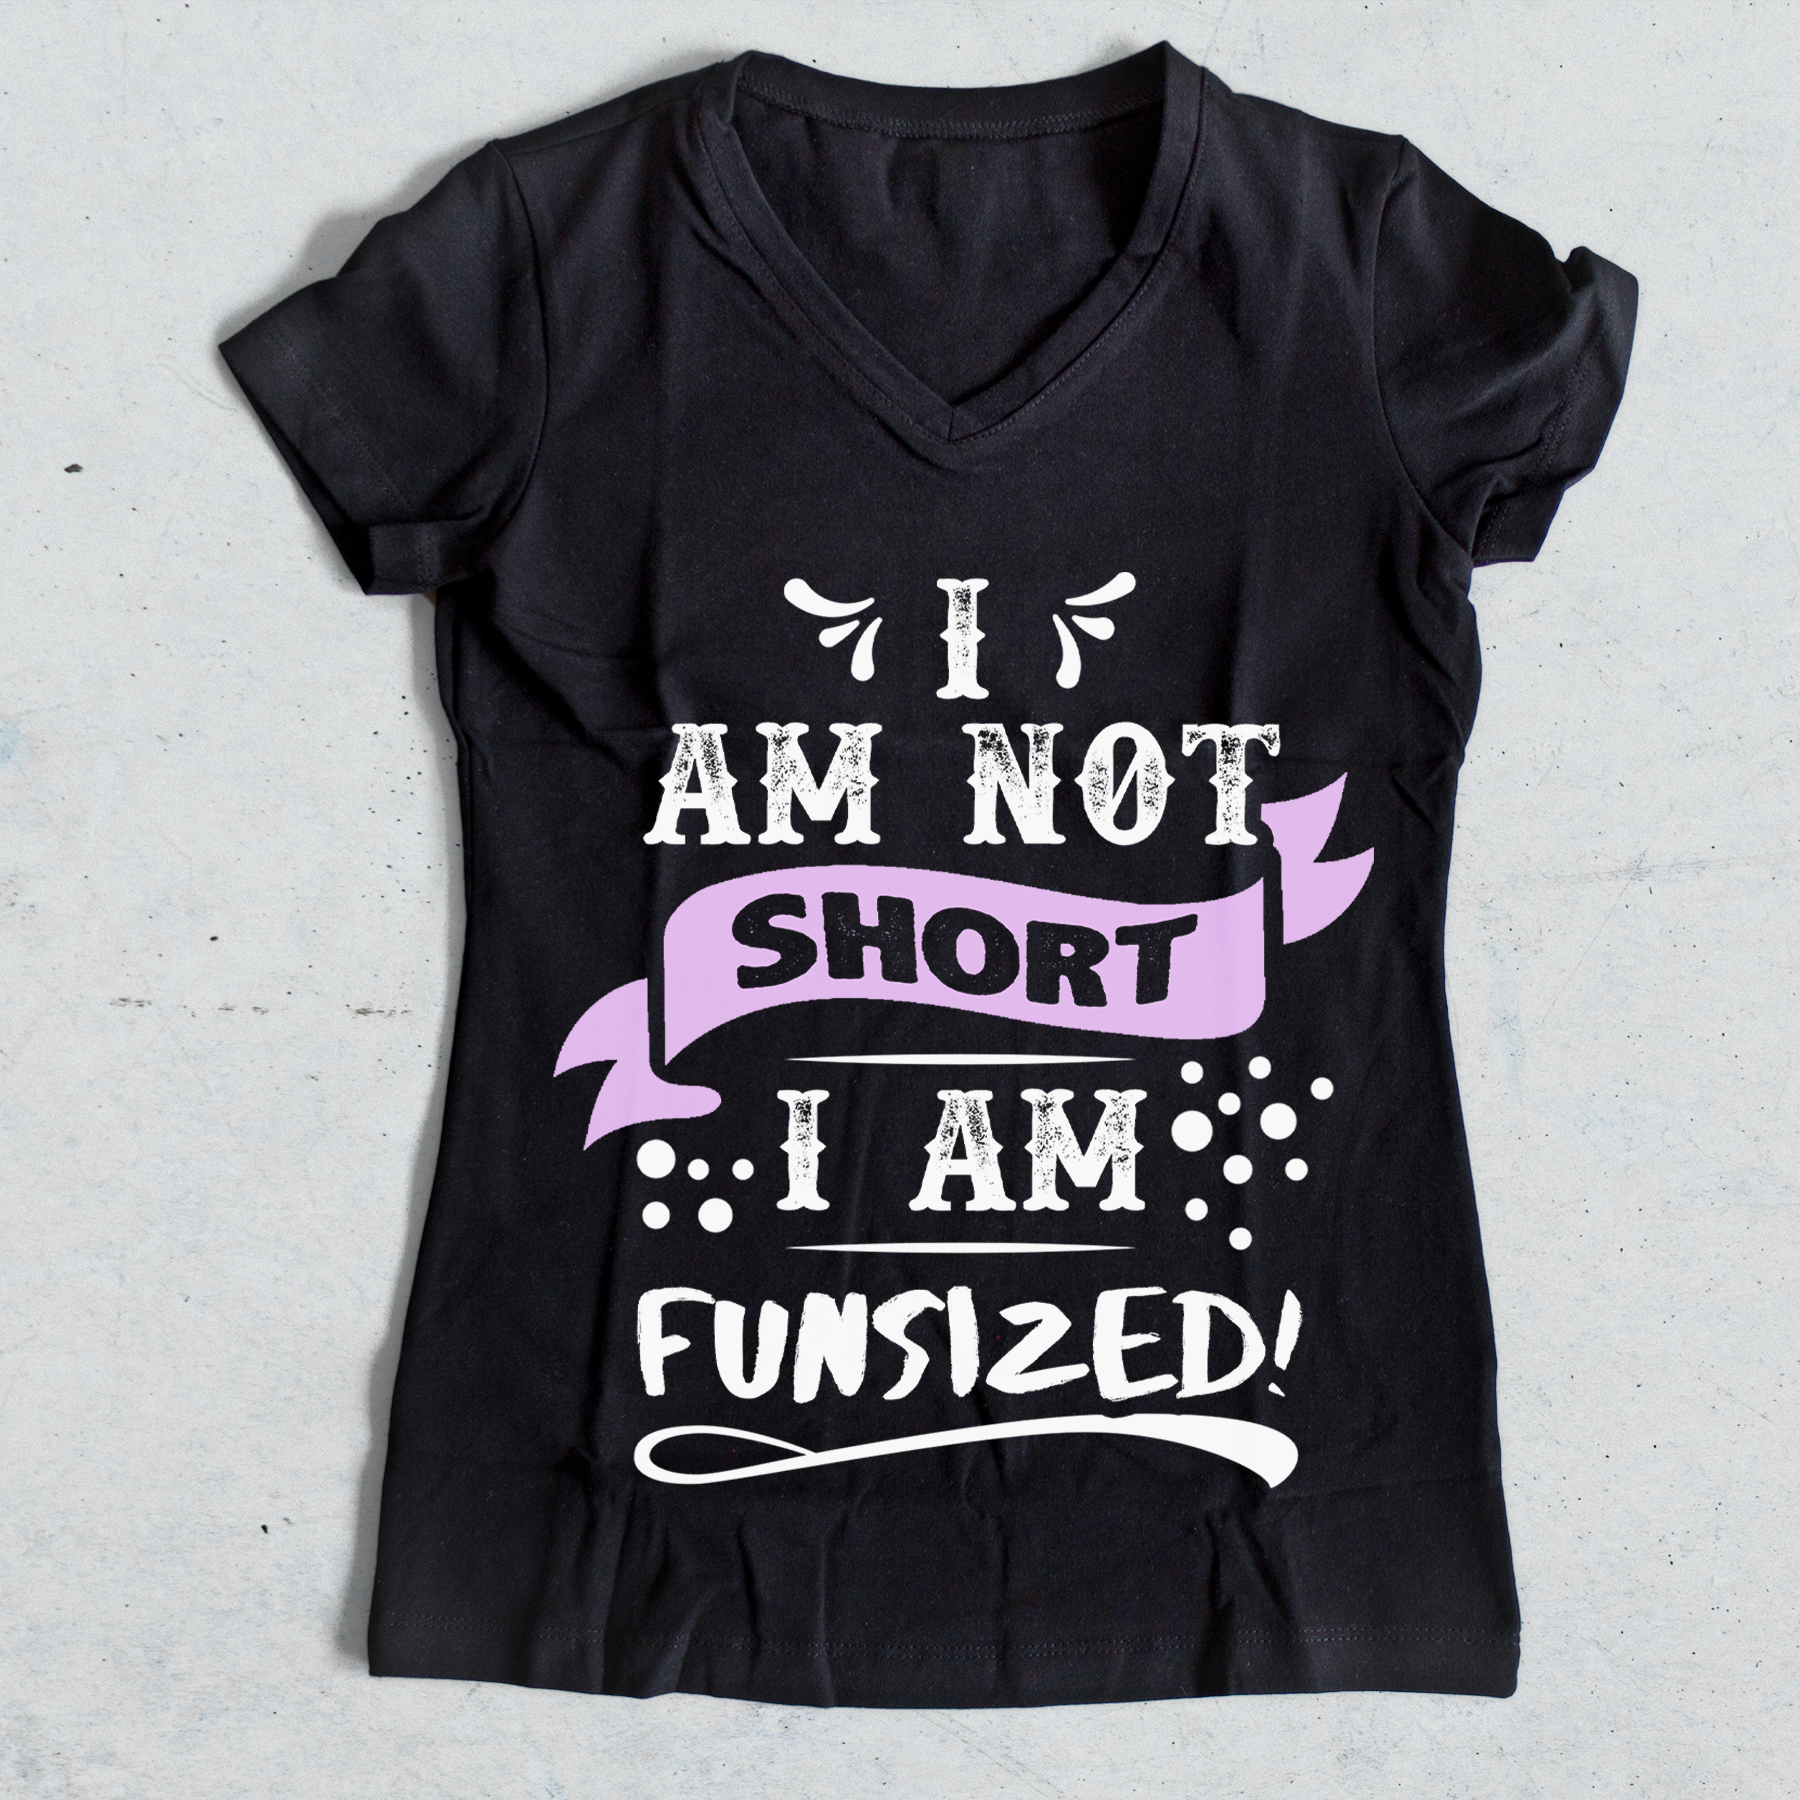 Just One More Athletics - Fun Sized - Women's Shirt